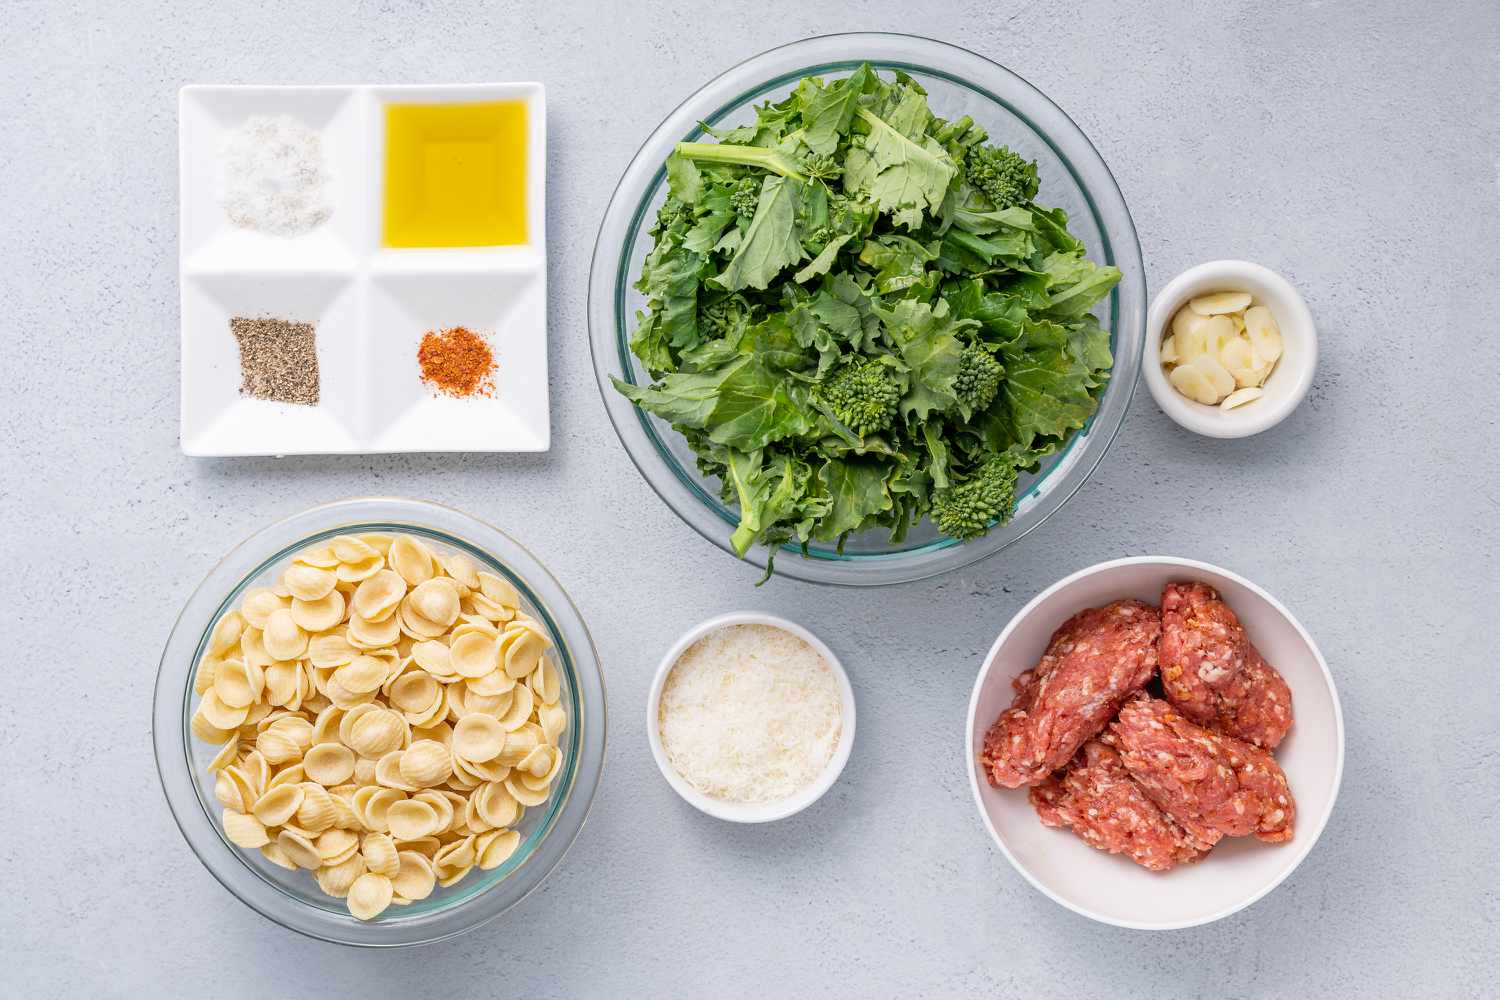 Ingredients to make orecchiette with sausage and broccoli rabe